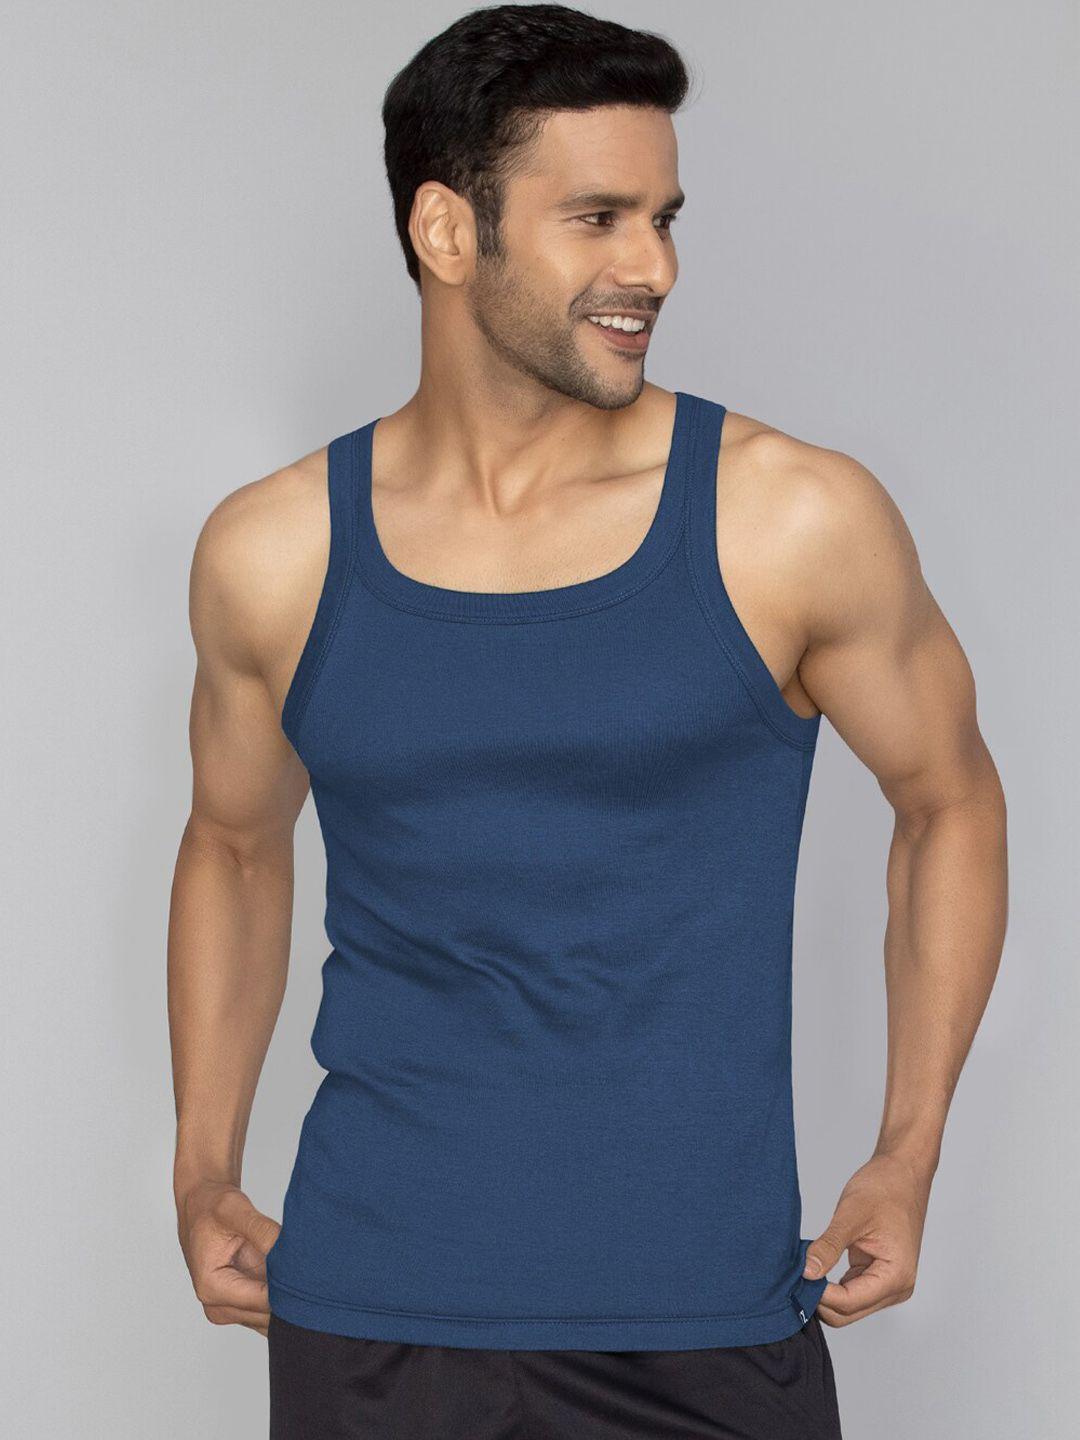 xyxx anti-bacterial super combed cotton innerwear gym vest